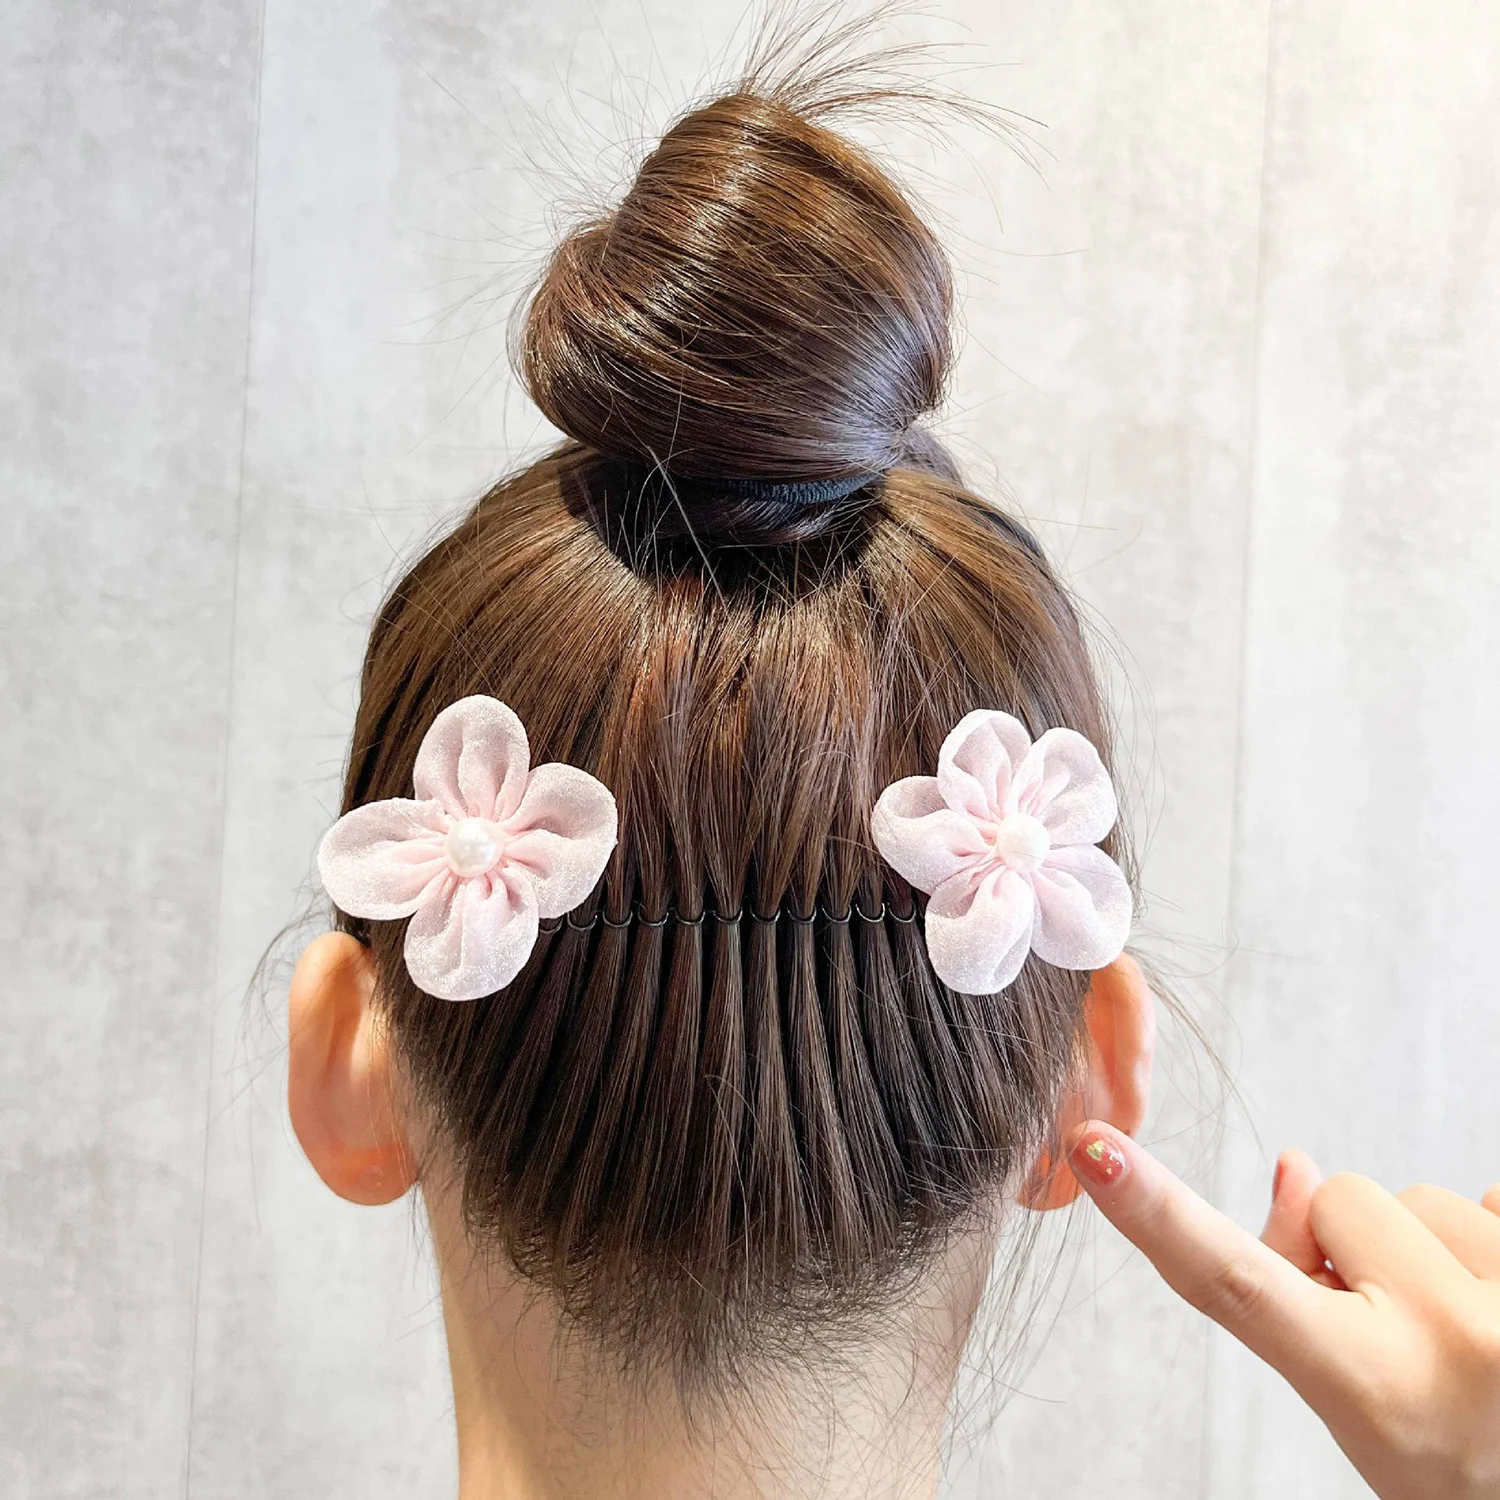 

Children Invisible Broken Hair Finishing Tool Hairpin Girl Curve Needle Bangs Fixed Insert Comb Professional Styling Accessories